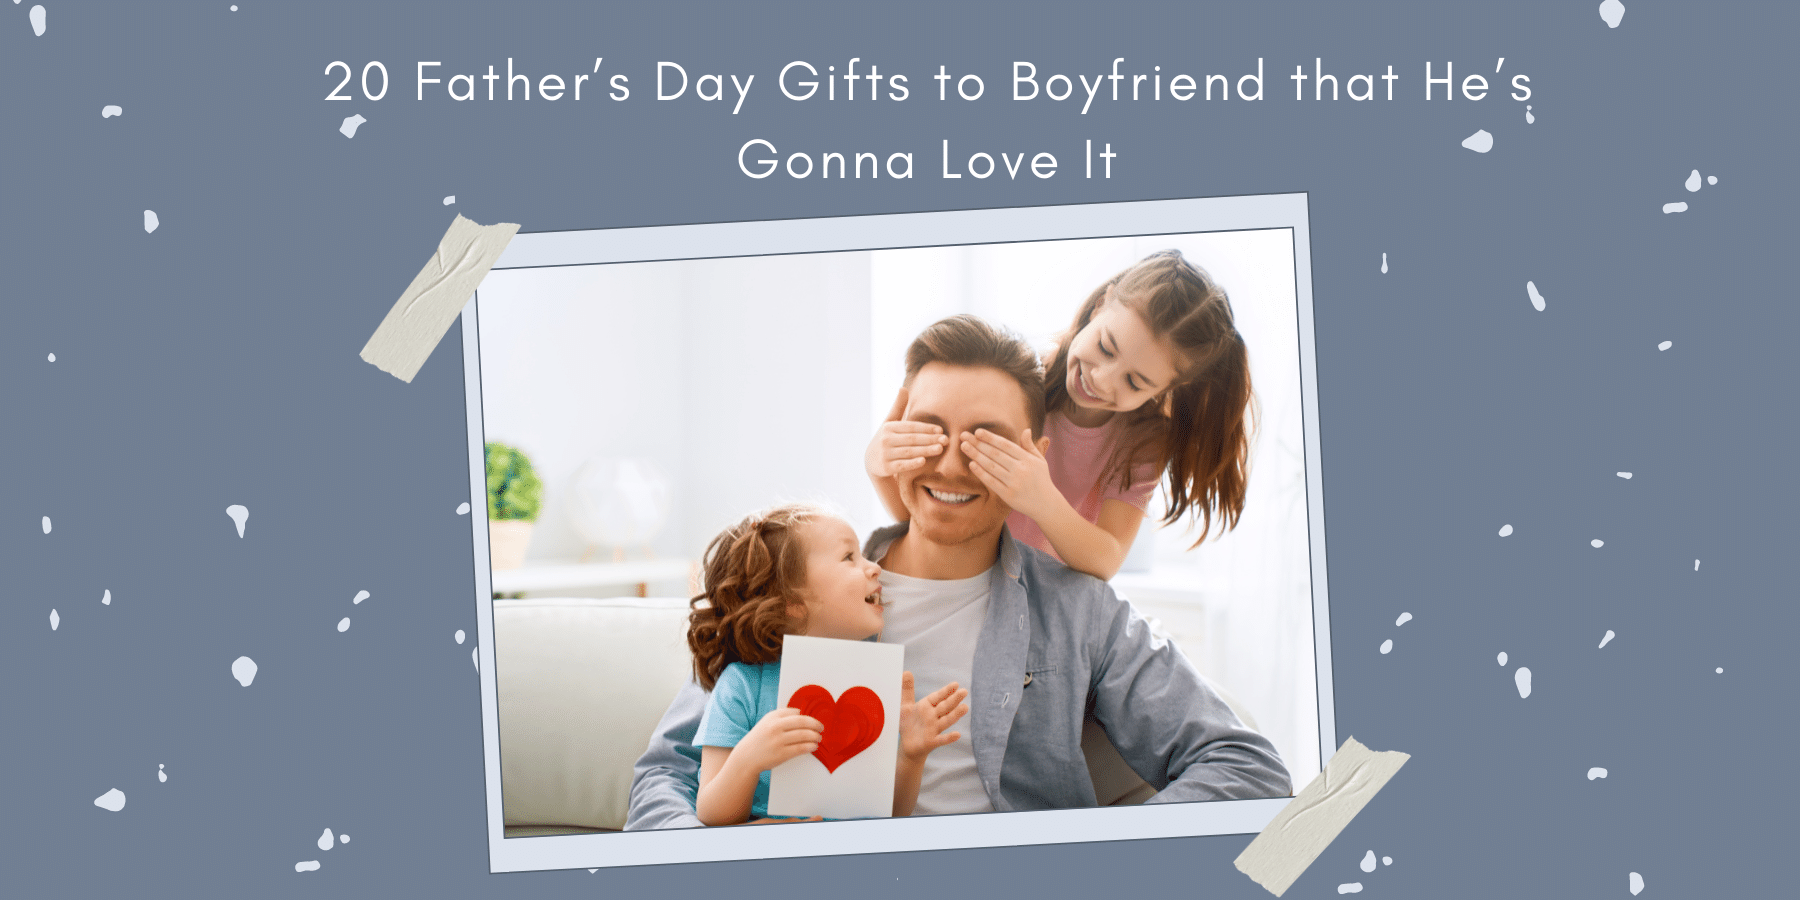 20 Father’s Day Gifts to Boyfriend that He’s Gonna Love It